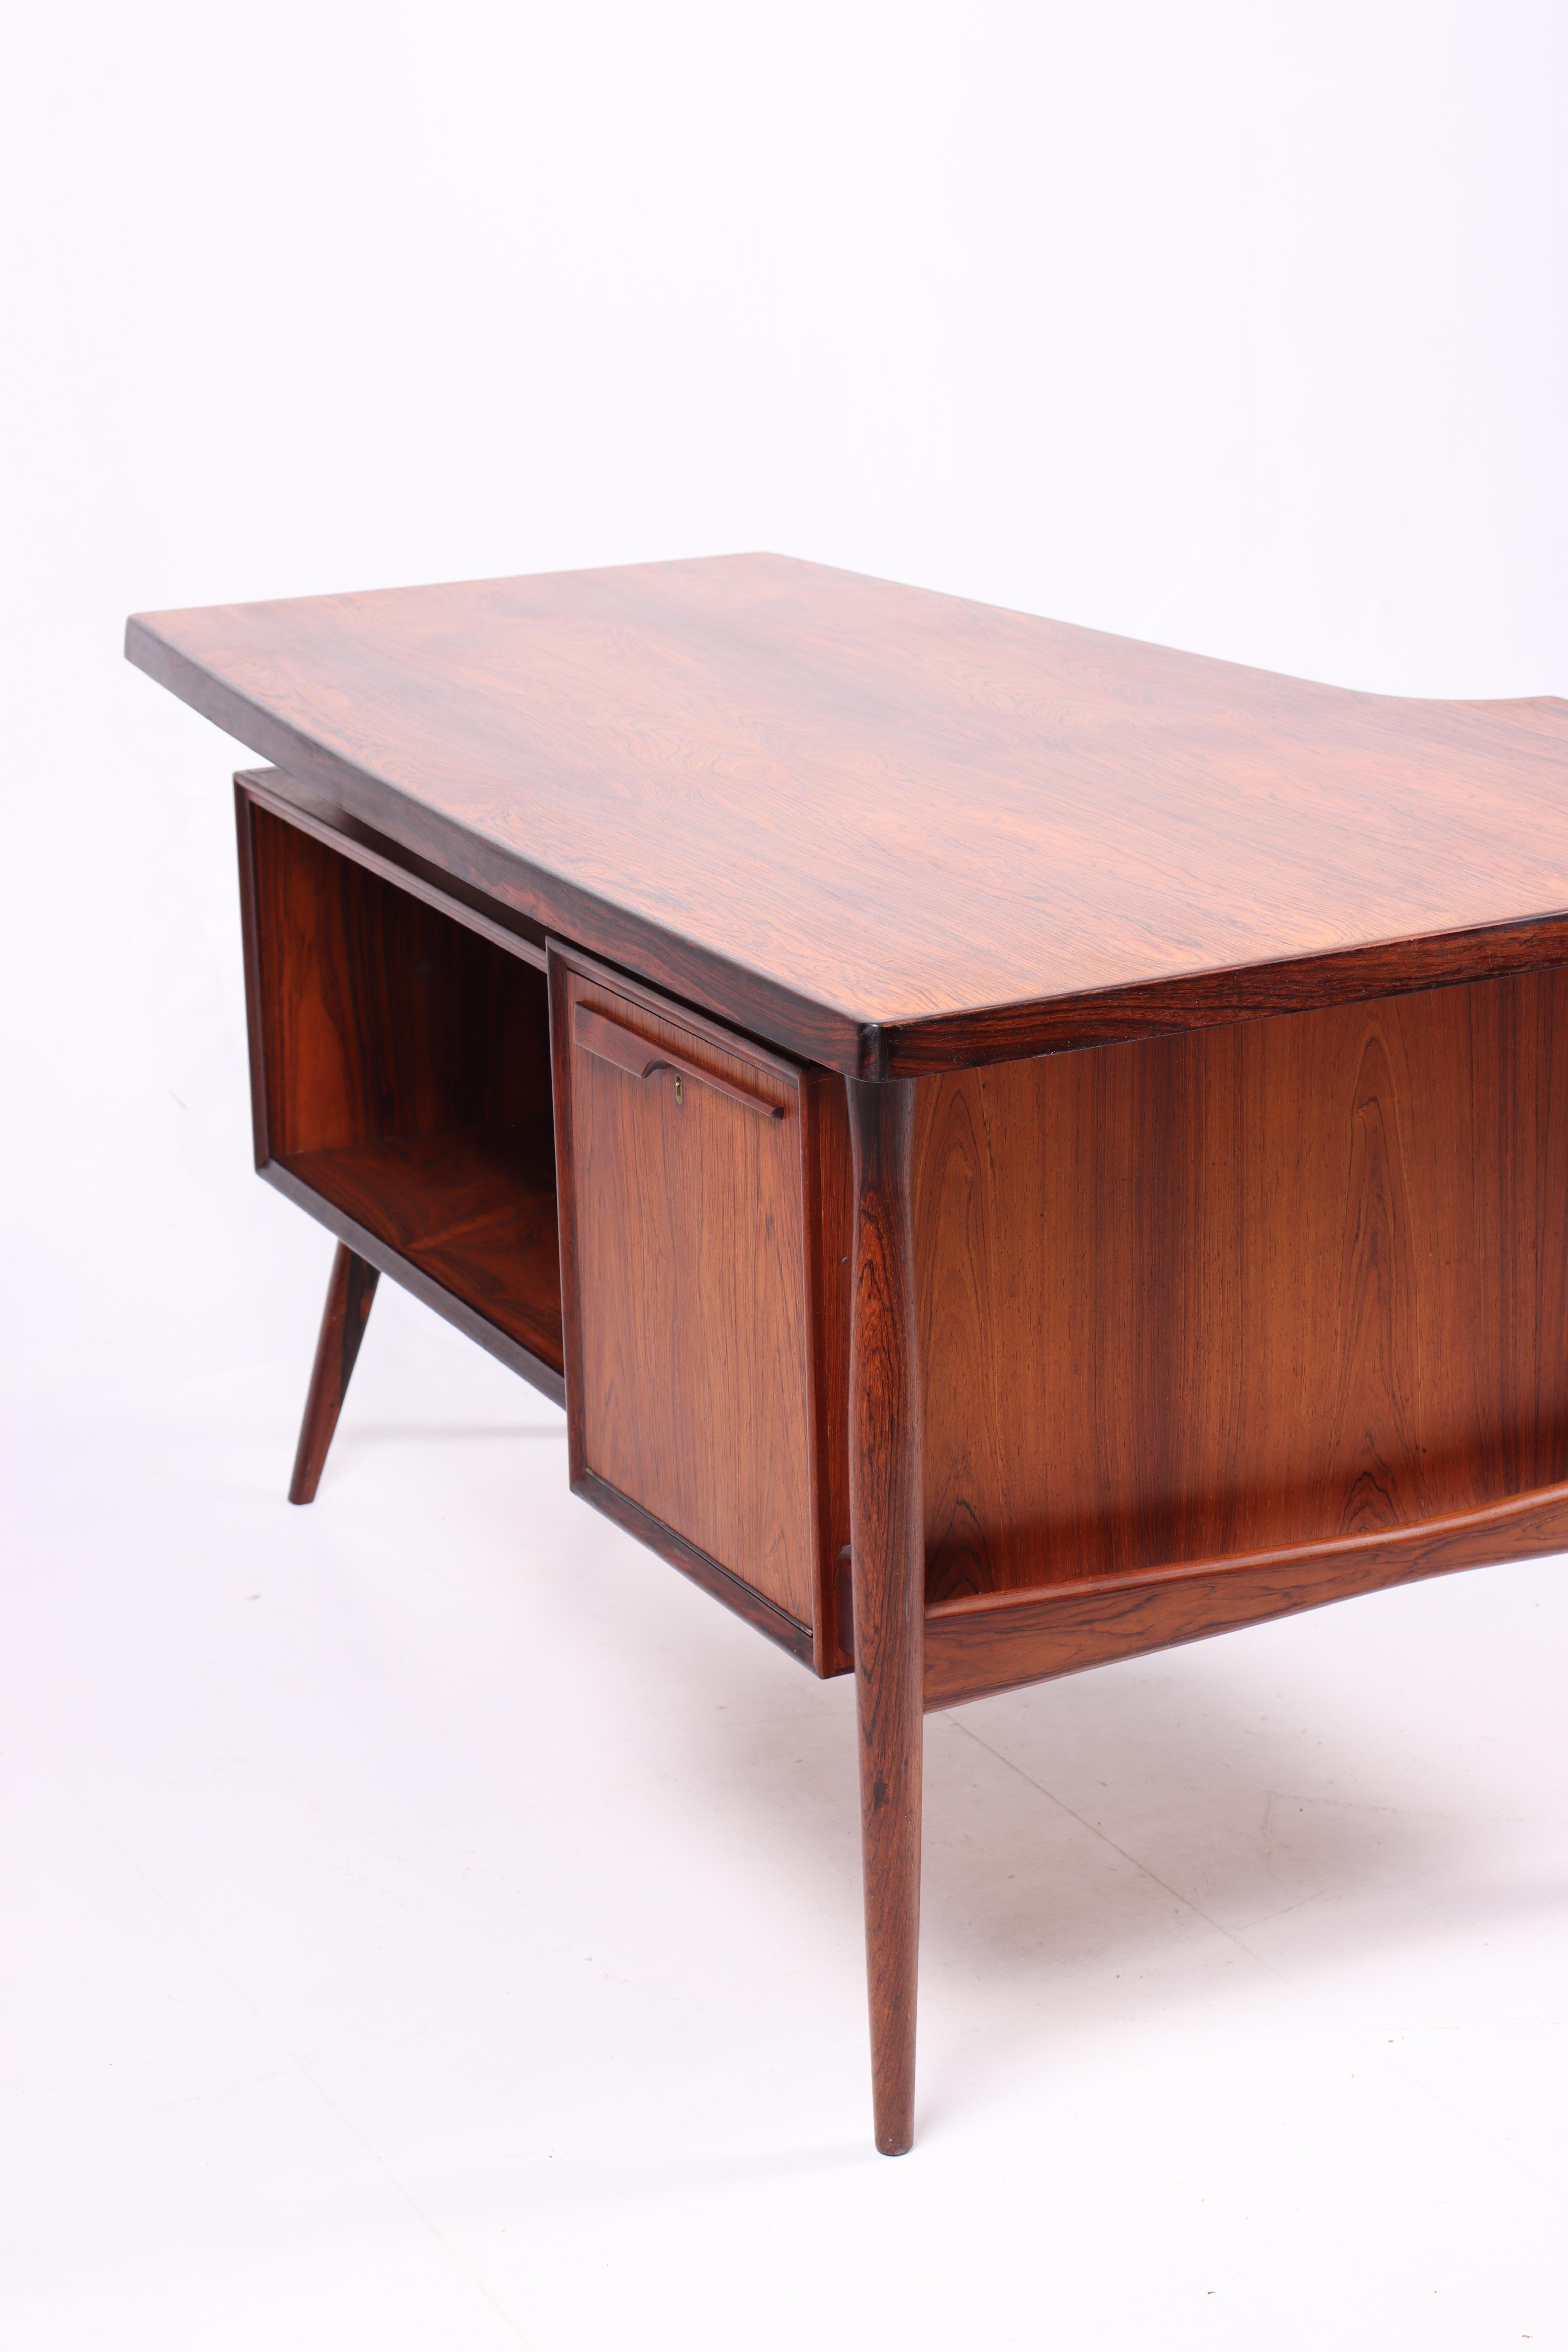 Midcentury Desk in Rosewood, Made in Denmark 1960s For Sale 1